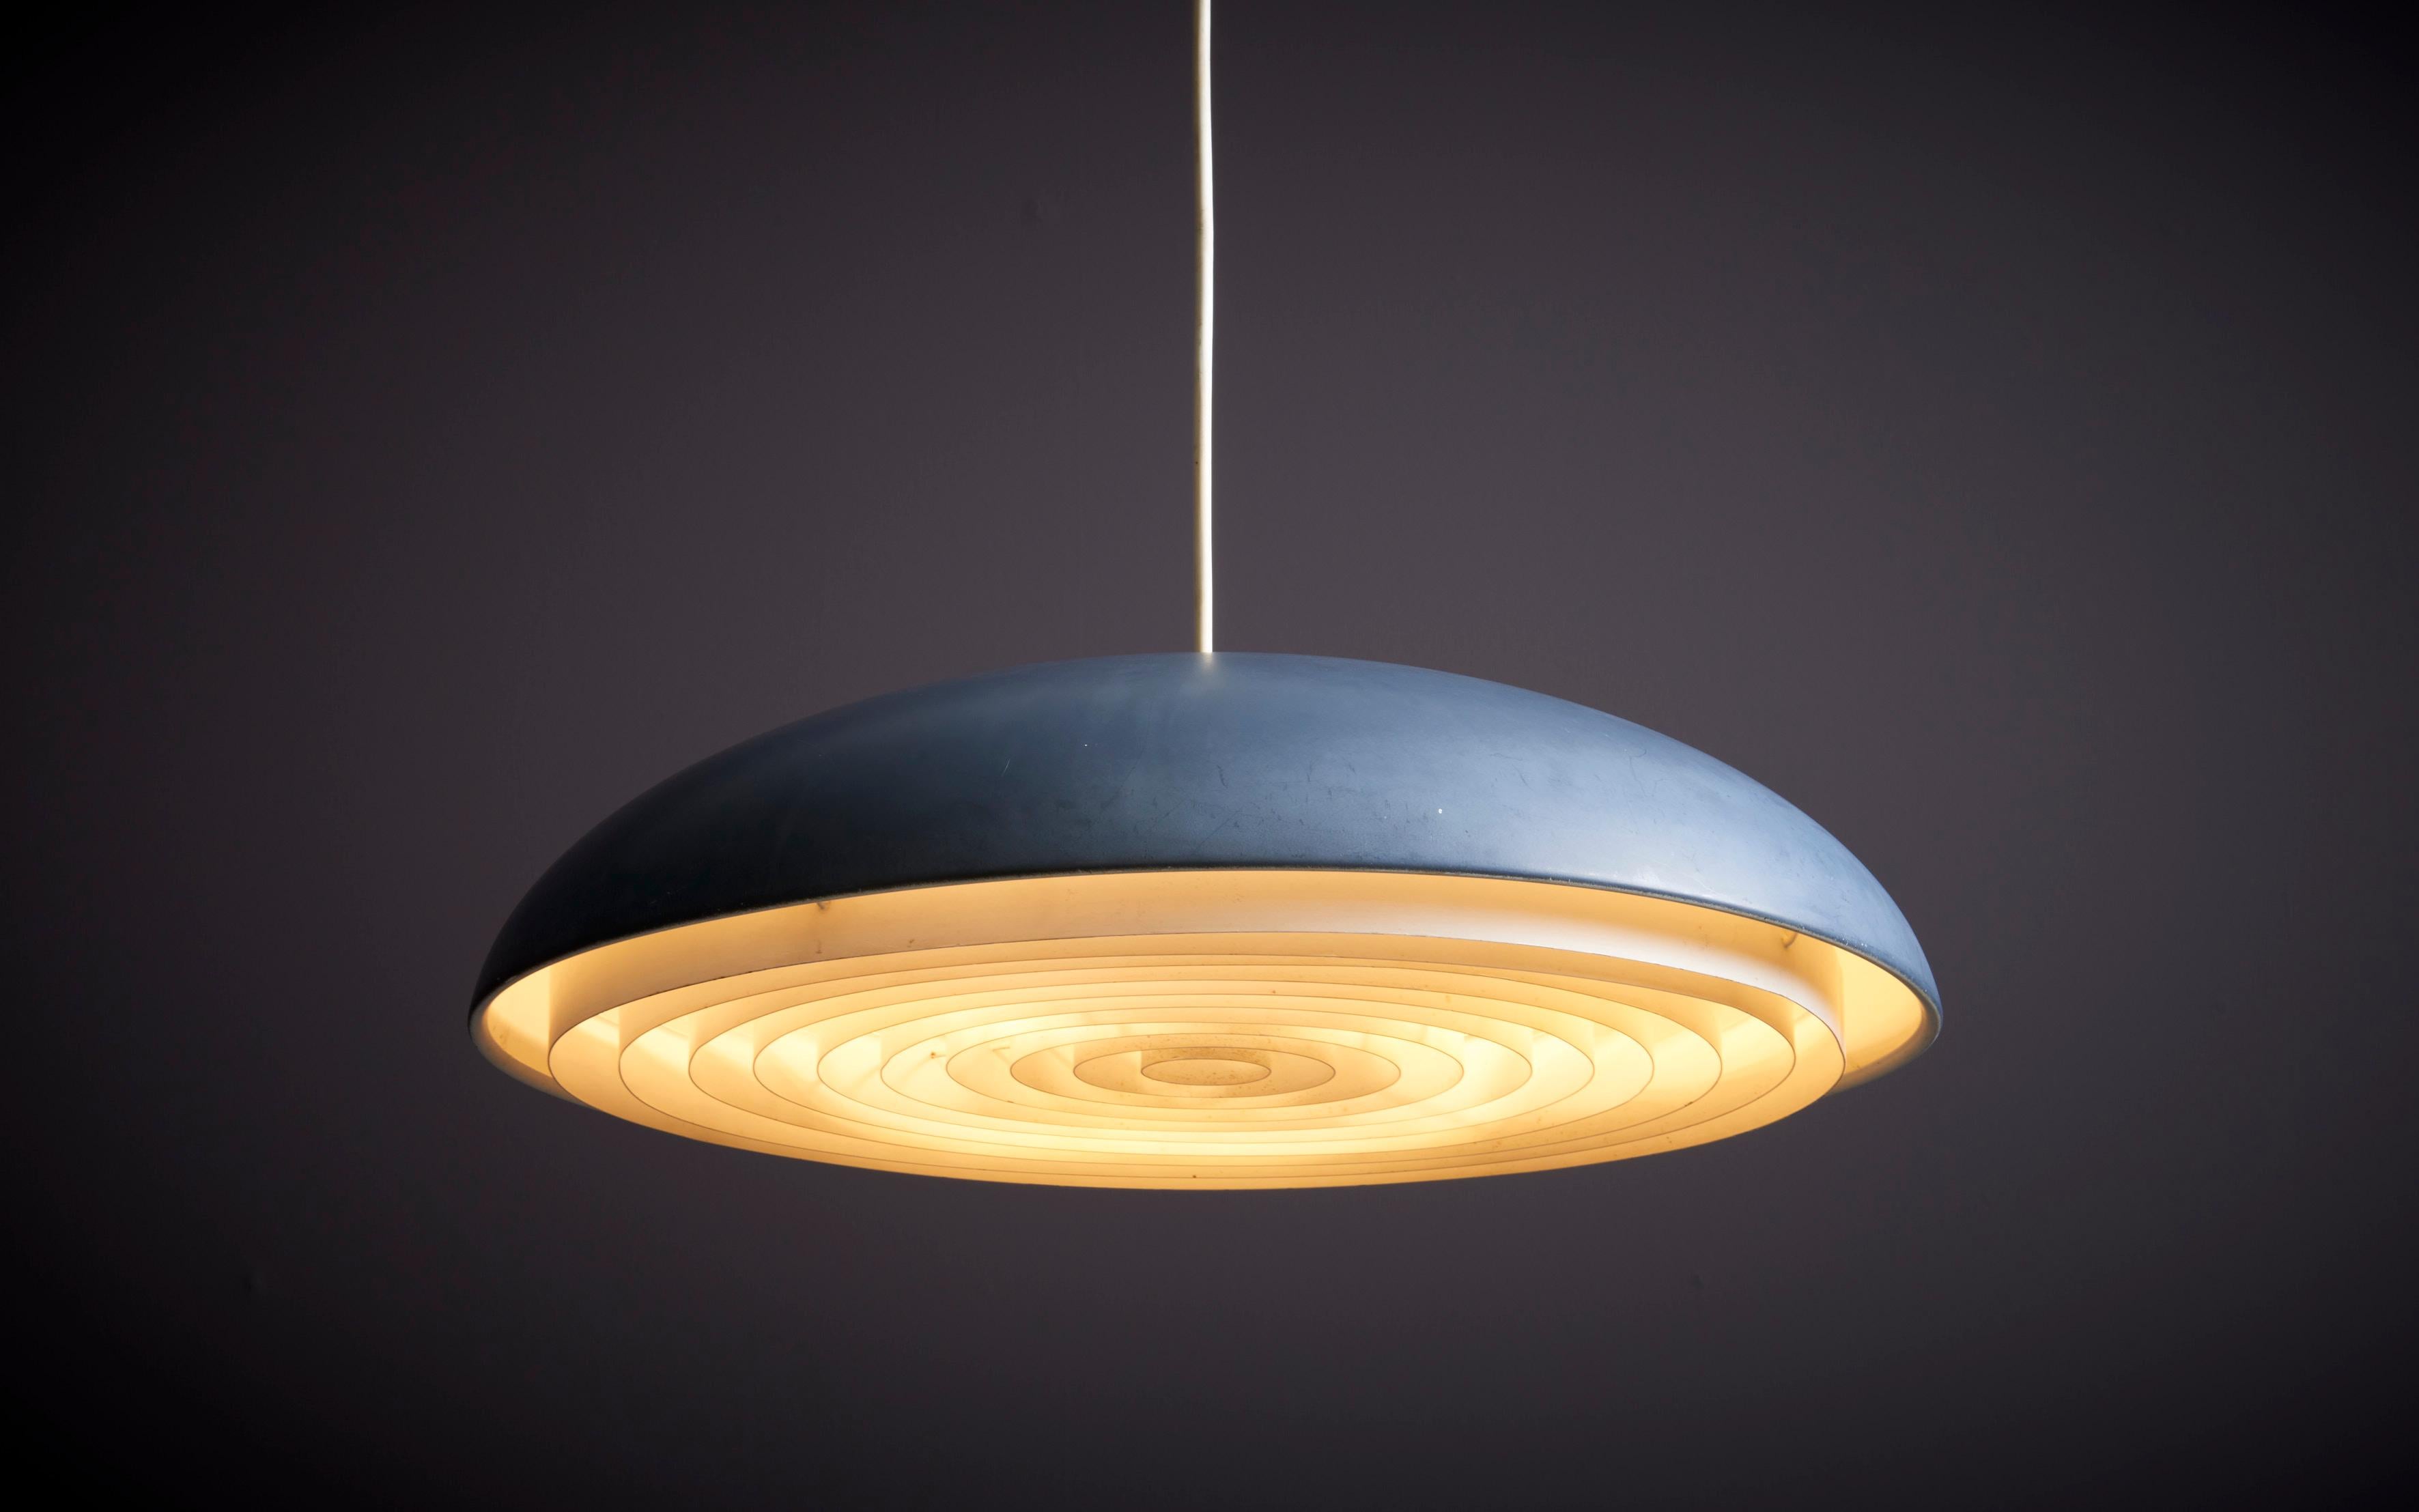 Architectural 'California' Pendant Lamp in rare blue / grey Denmark 1960s.
3x E27 Bulbs. Please note: Lamp should be fitted professionally in accordance to local requirements.

The California lamp was designed by the Danish architects and designers